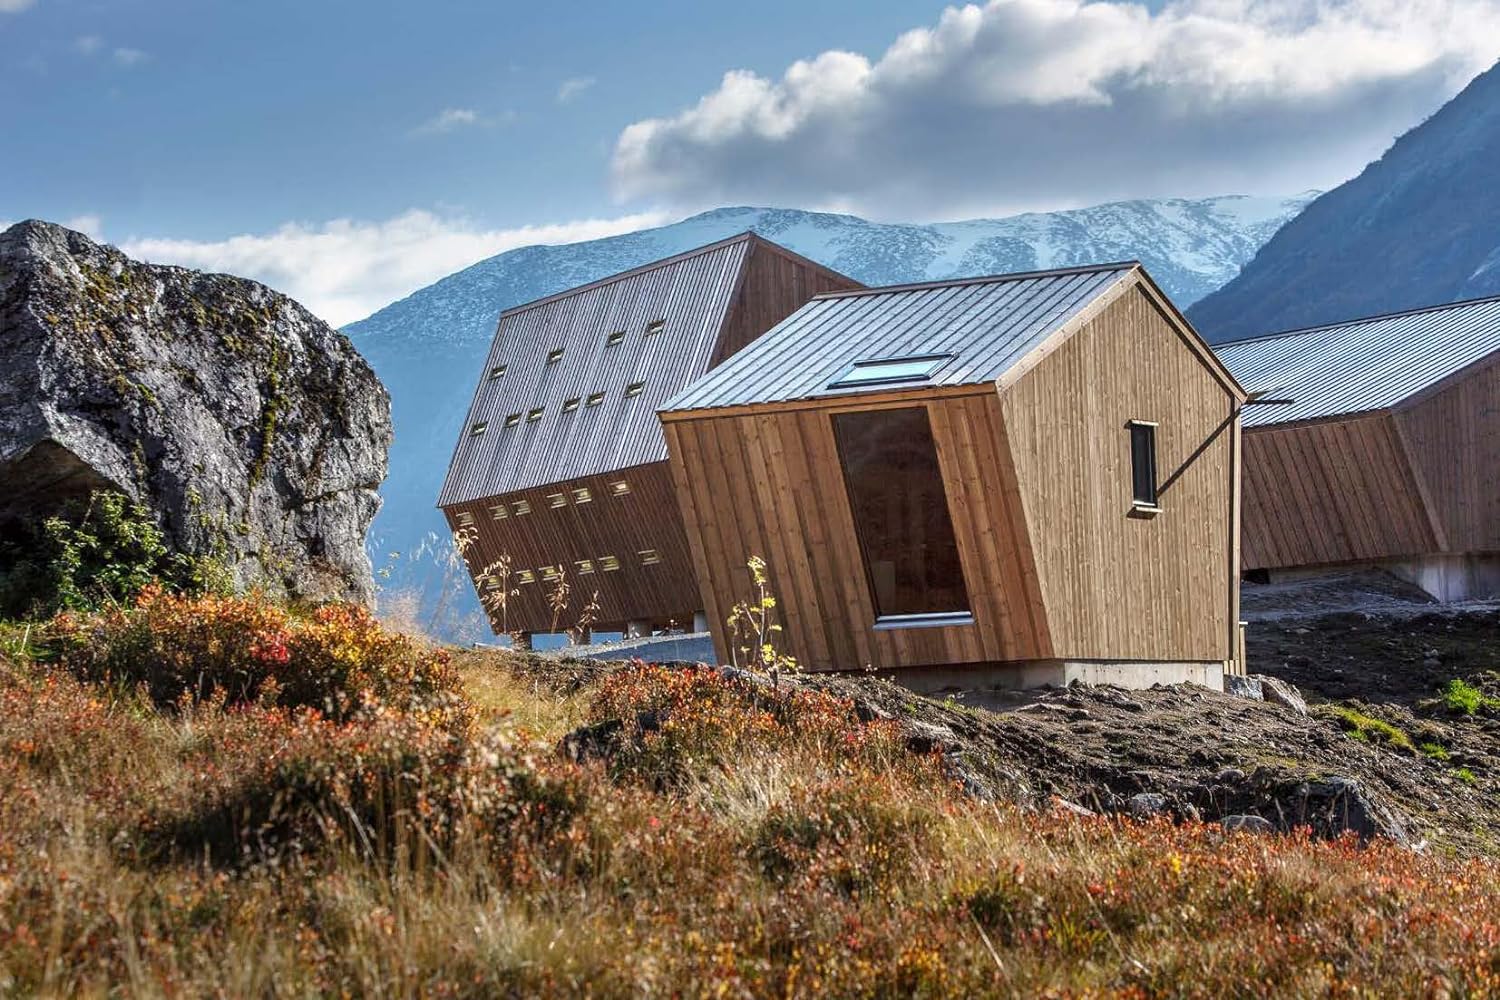 Amazing Mountain Cabins - Architecture Worth the Hike